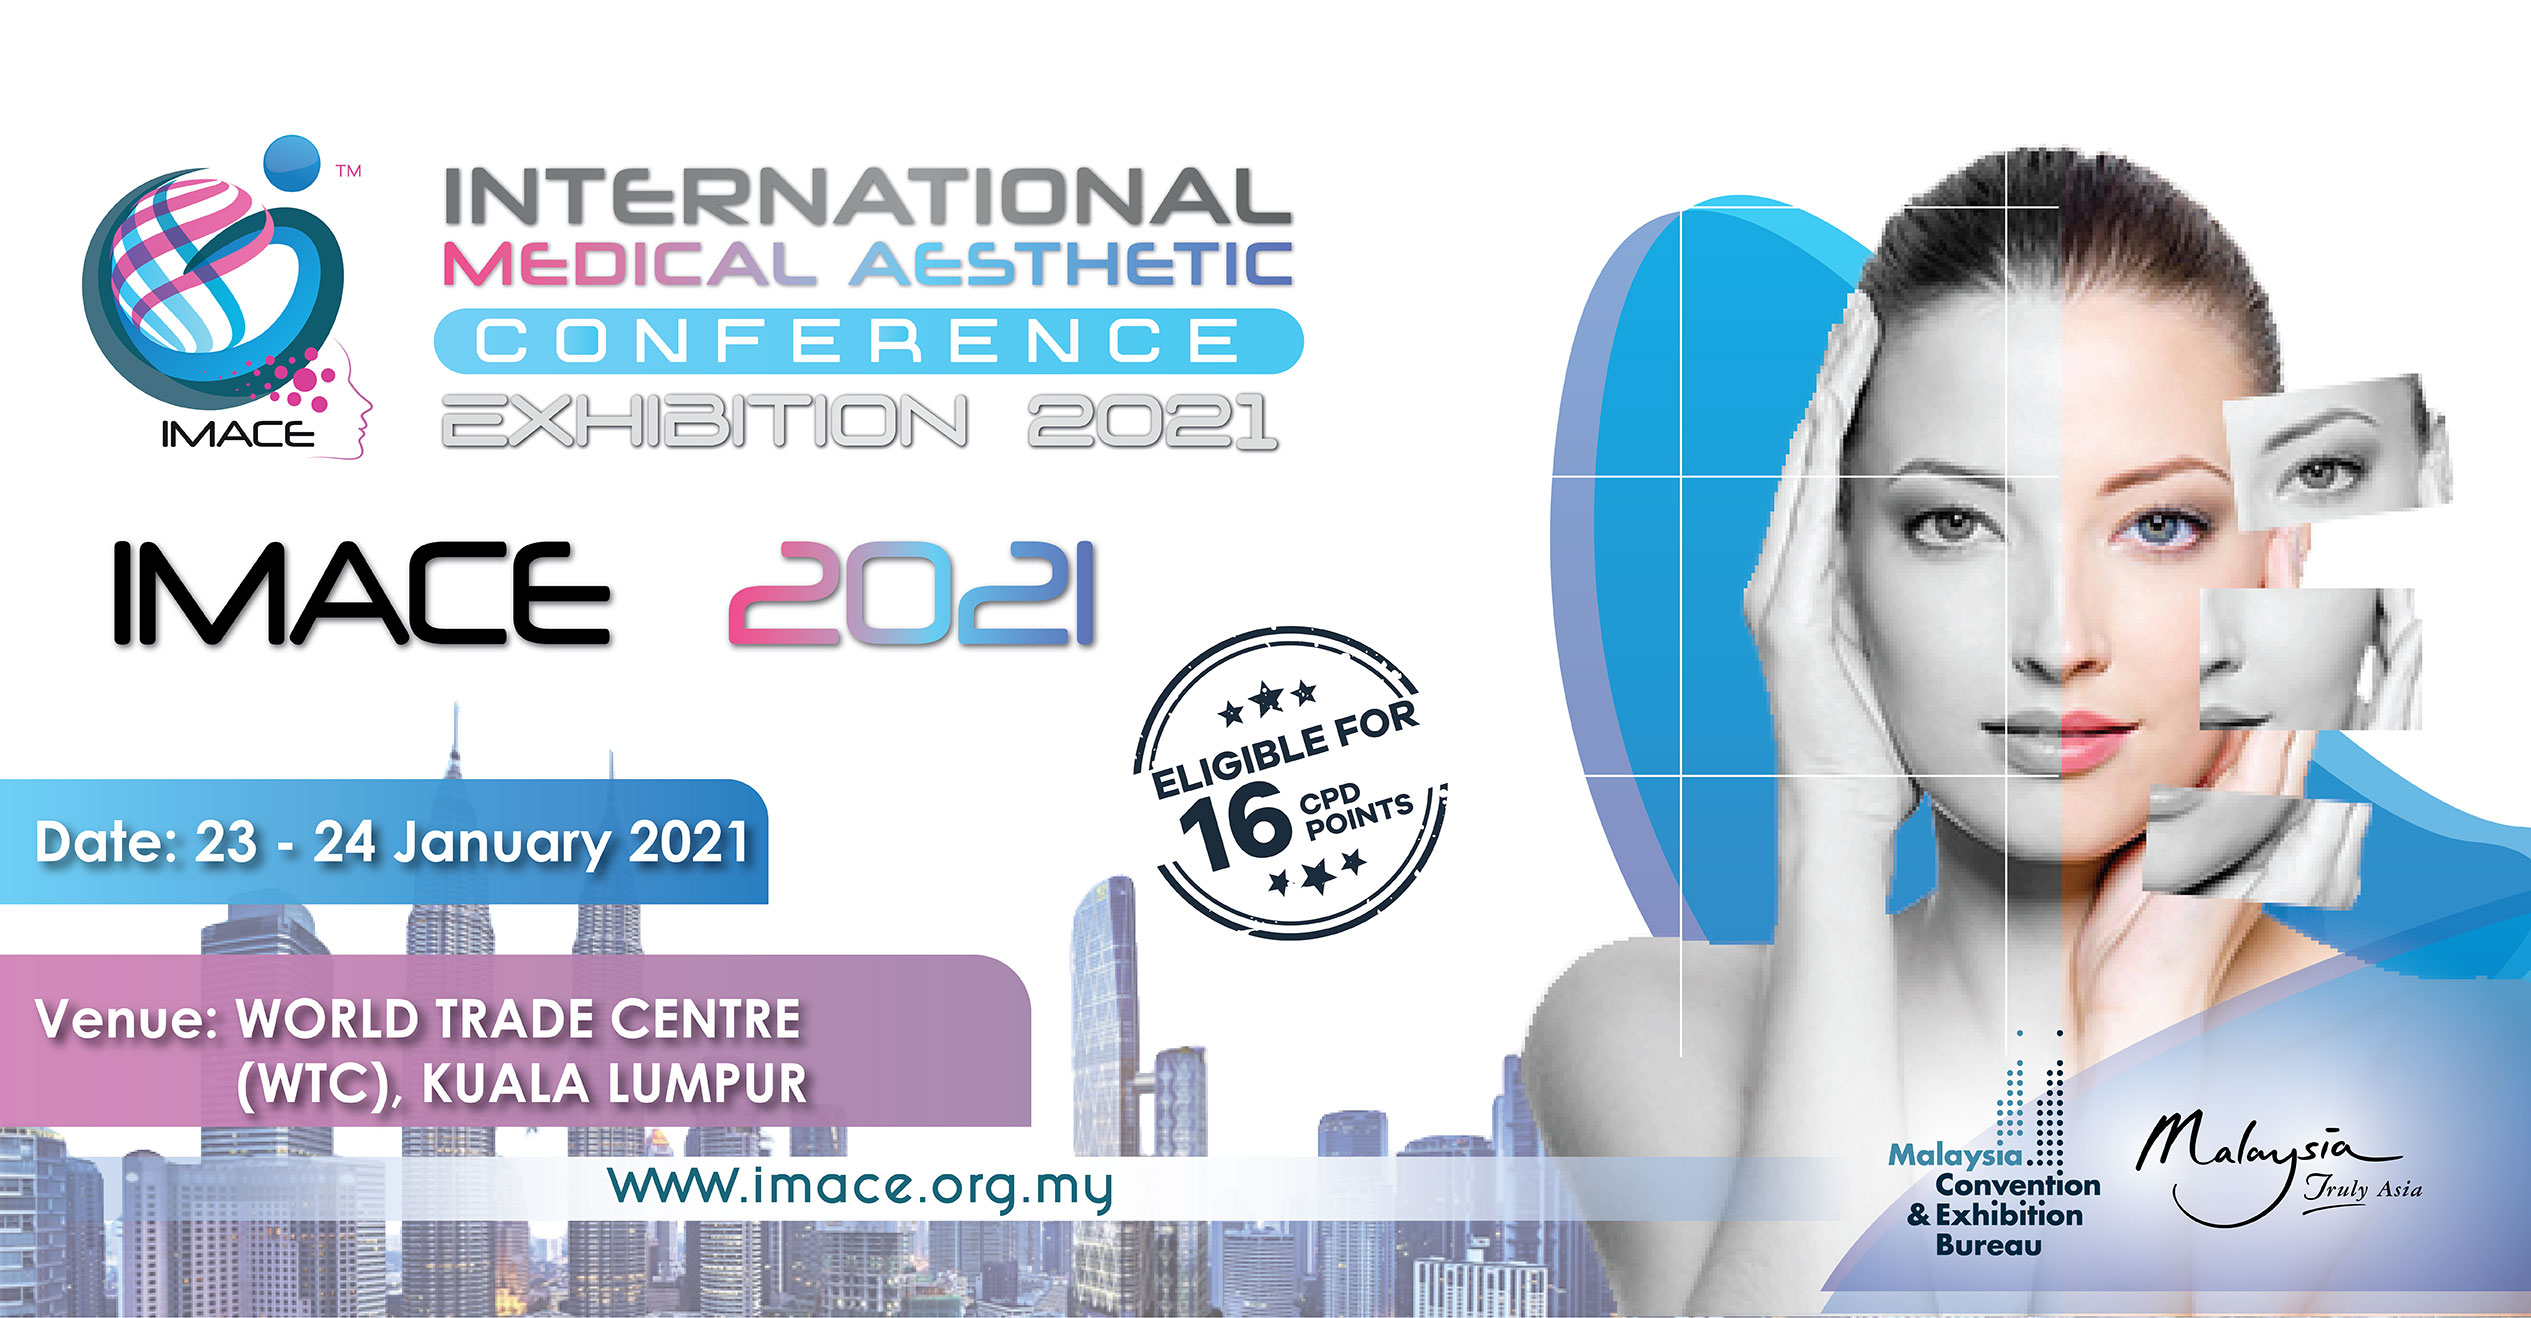 International Medical Aesthetic Conference and Exhibition